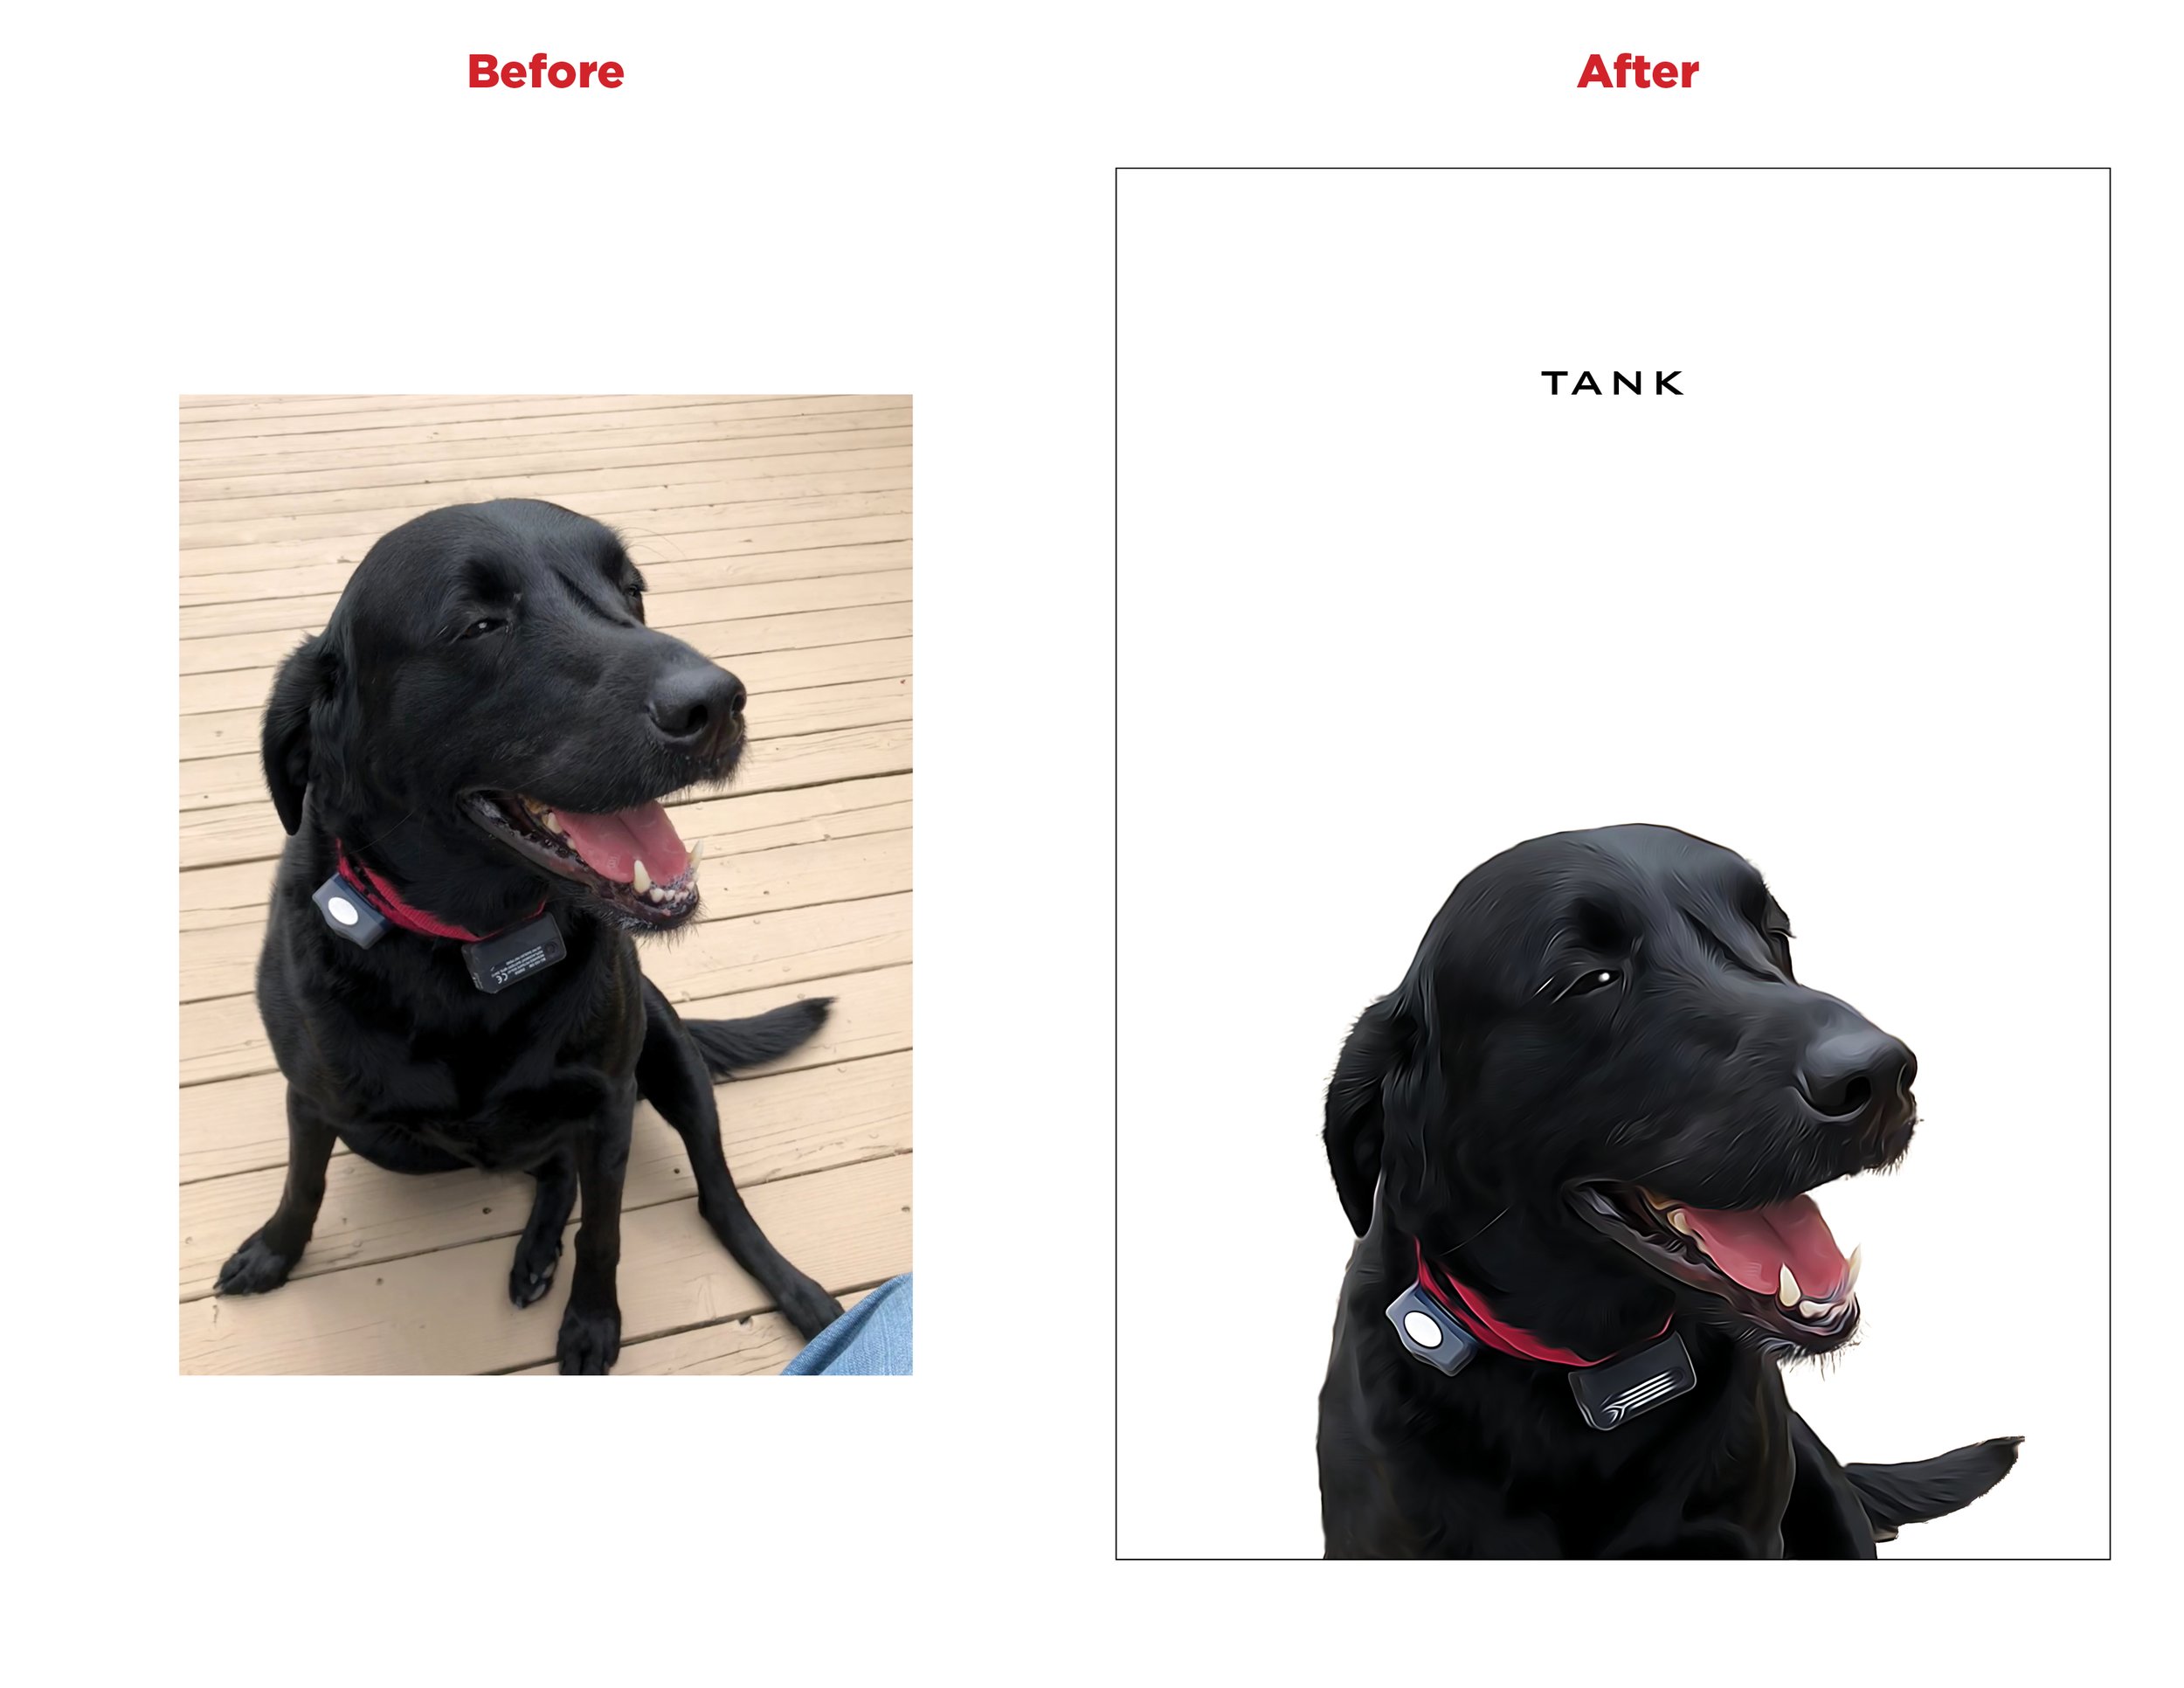 Before and after tank.jpg